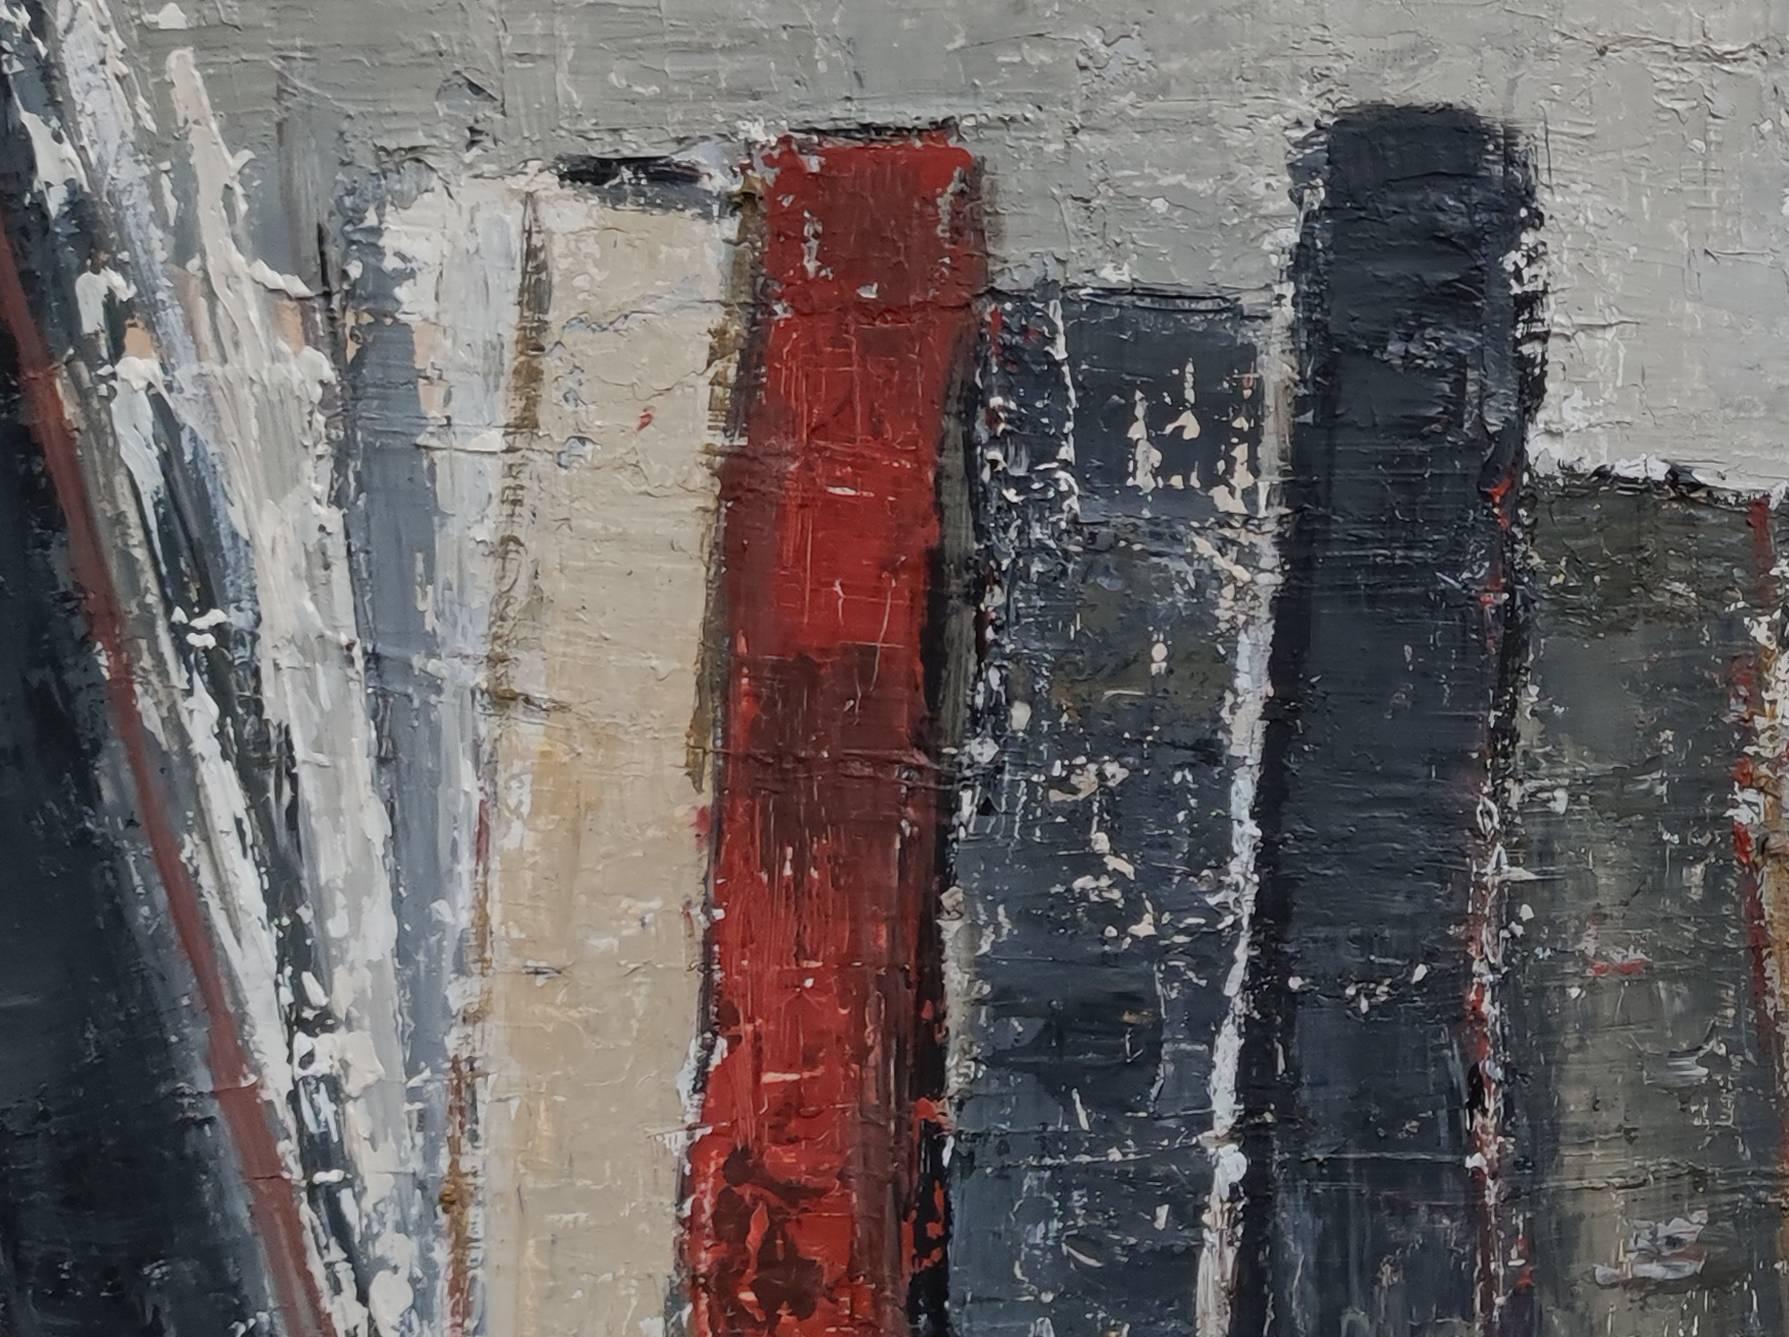 in octavo, abstract, minimalism, textured, expressionism, oil, books, libraries  - Gray Abstract Painting by SOPHIE DUMONT